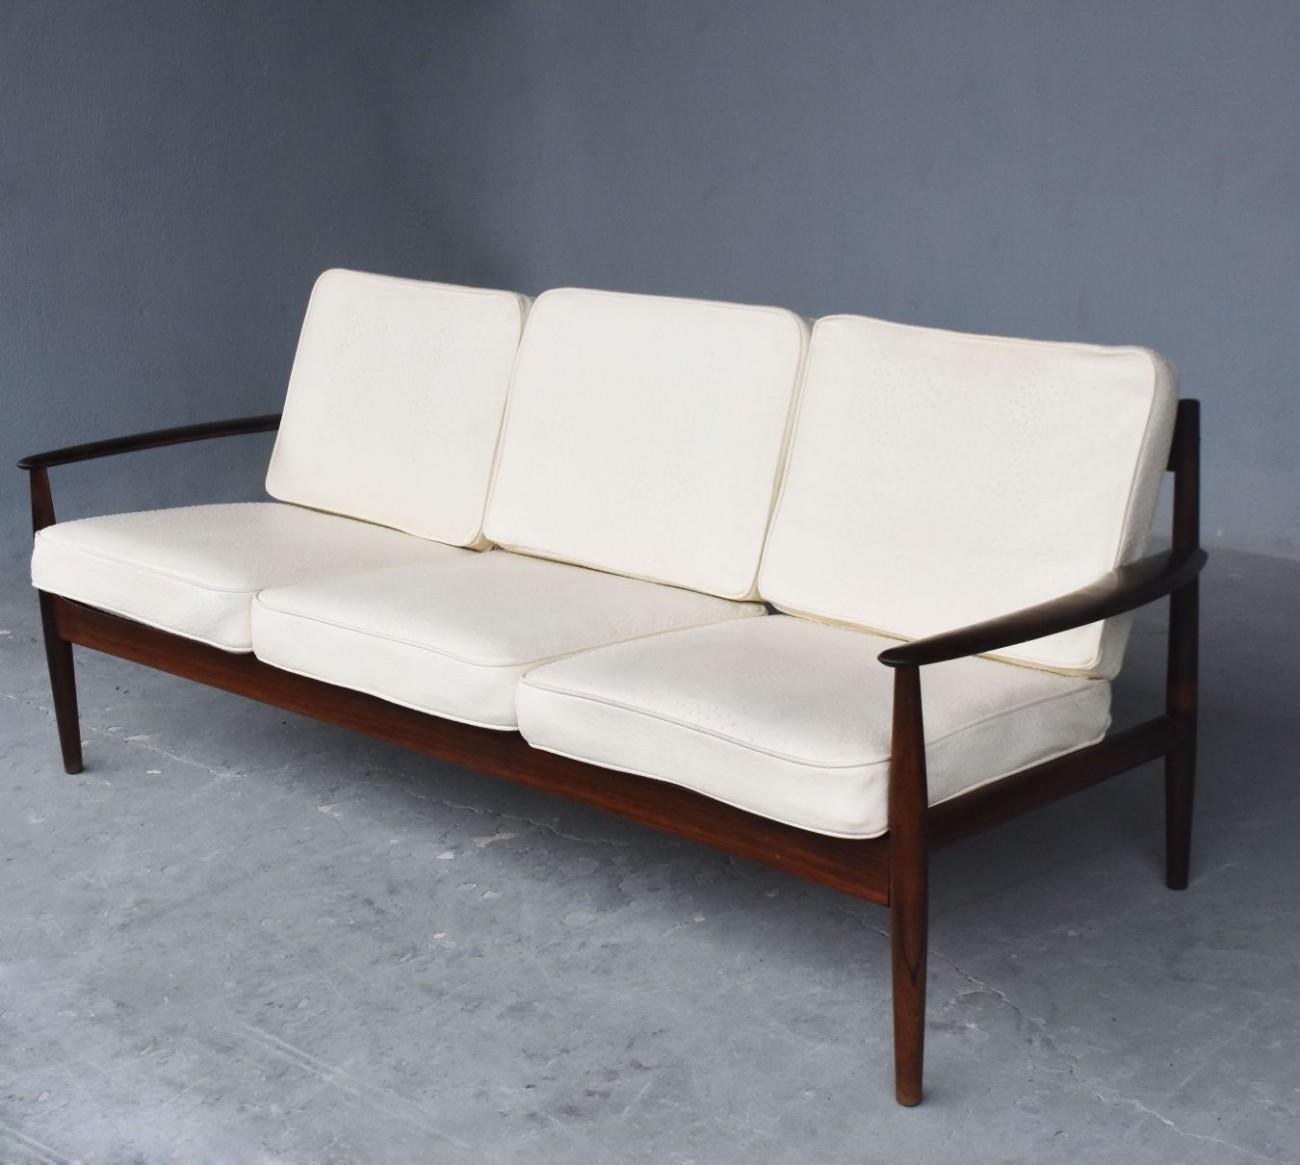 Bench model 118 in Brazilian rosewood by Grete Jalk for France & Sons, 1960s. A pair of armchairs goes with this seat sold separately see photos. Cushions redone simili ostrich leather.